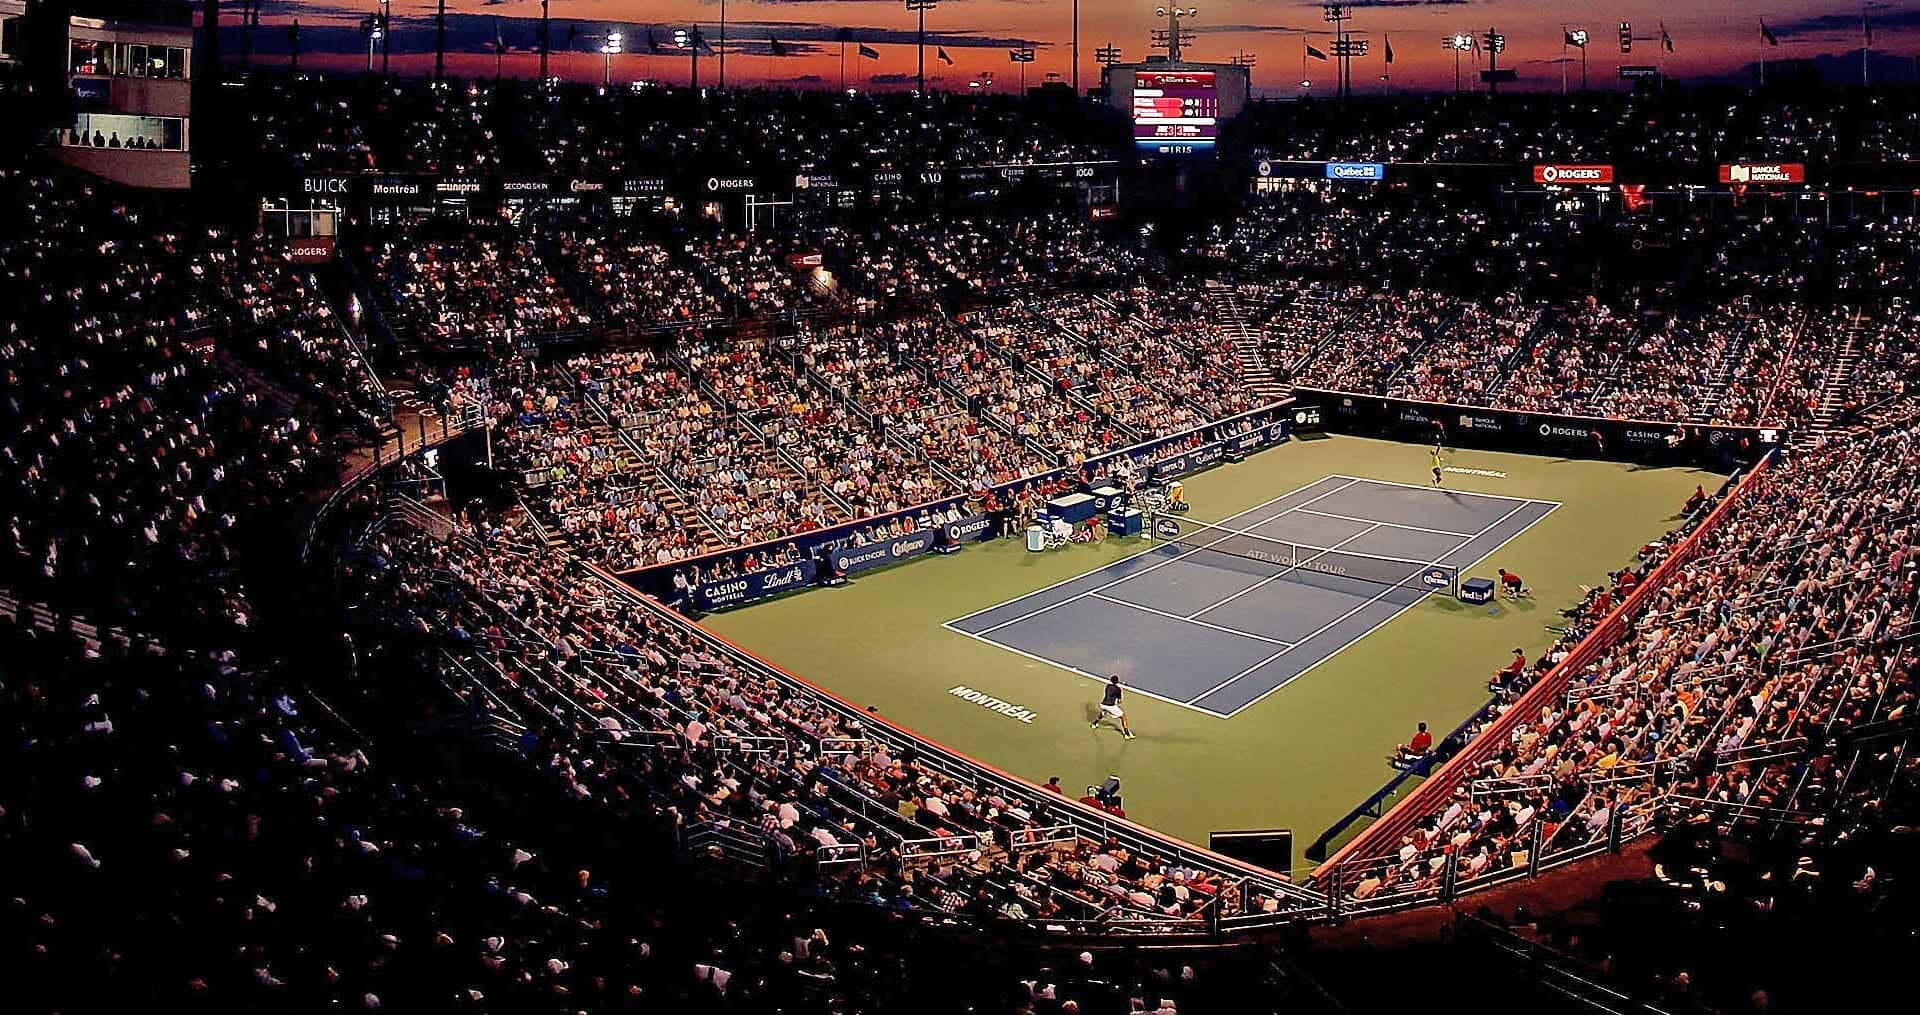 watch atp montreal